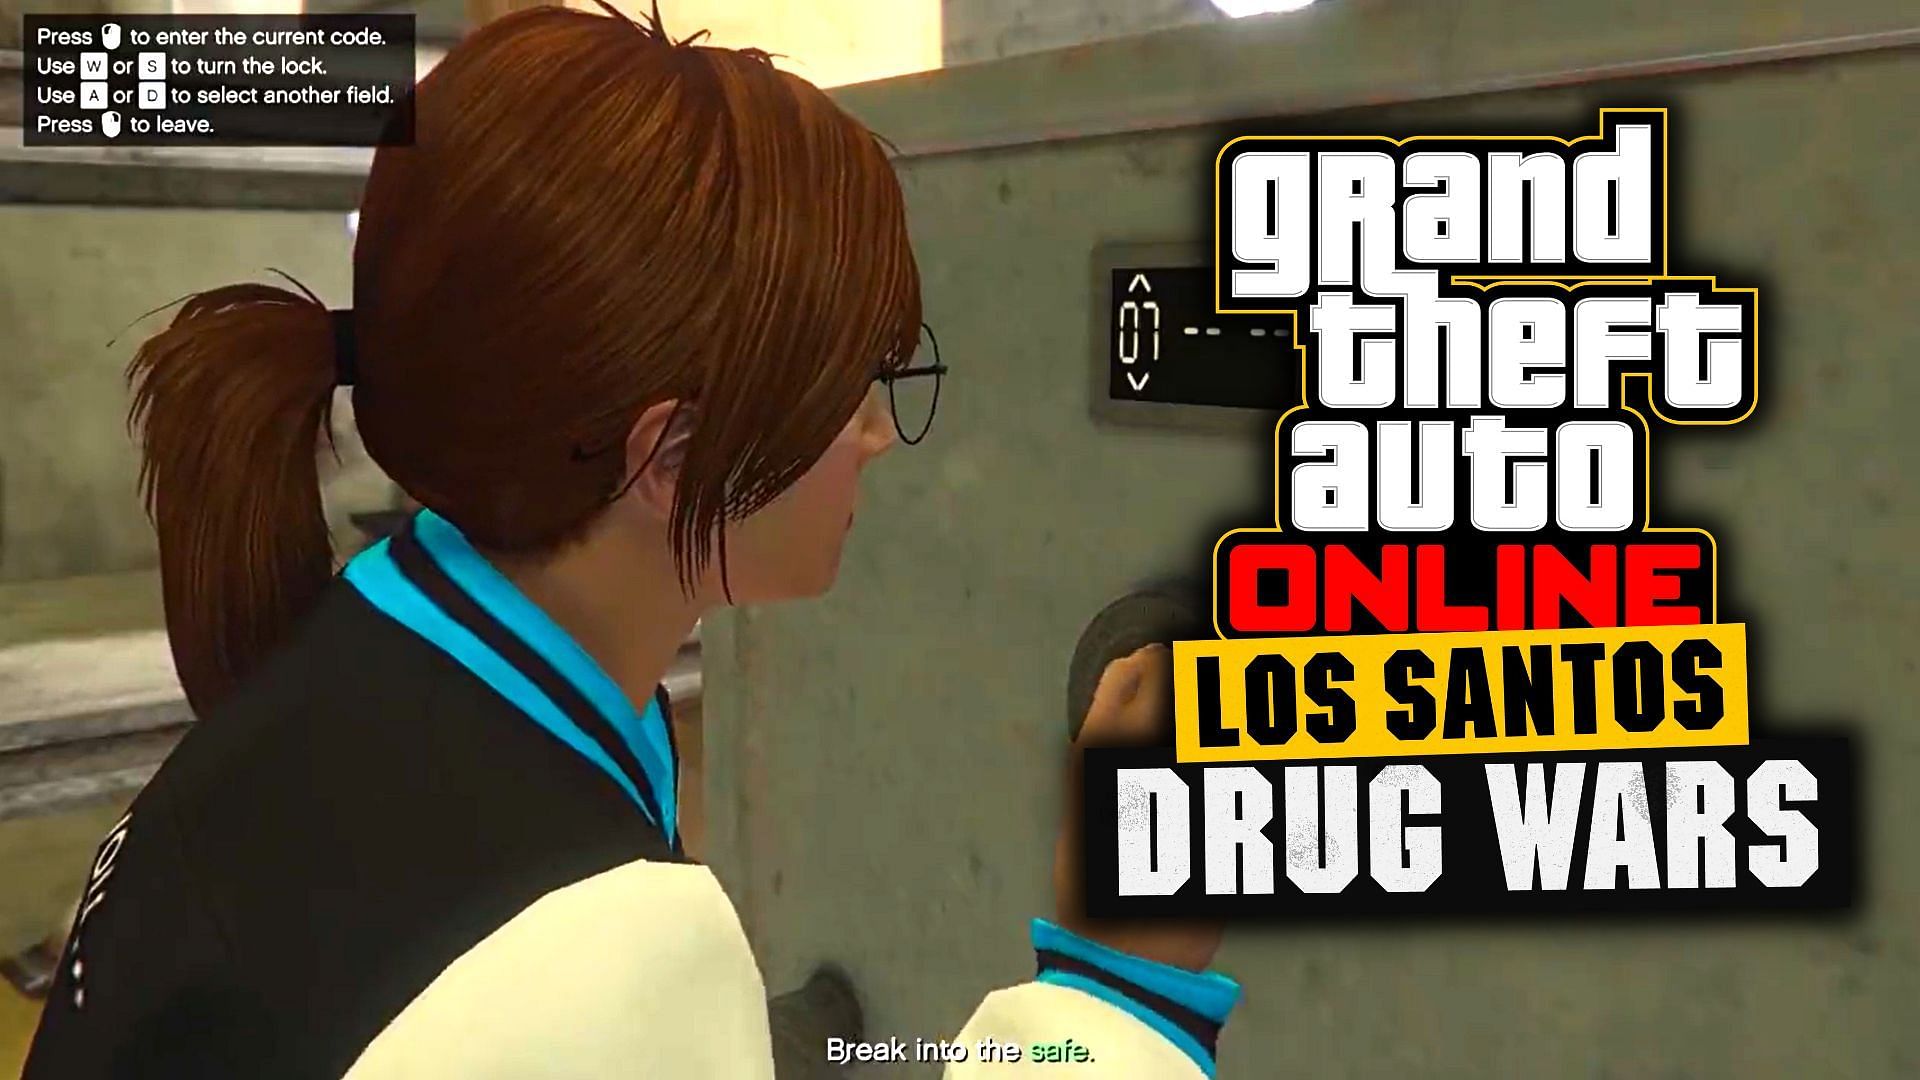 A new report leaked an upcoming Stash House daily collectible coming to GTA Online as part of the Los Santos Drug Wars drip feed (Image via WildBrick142 on Twitter)